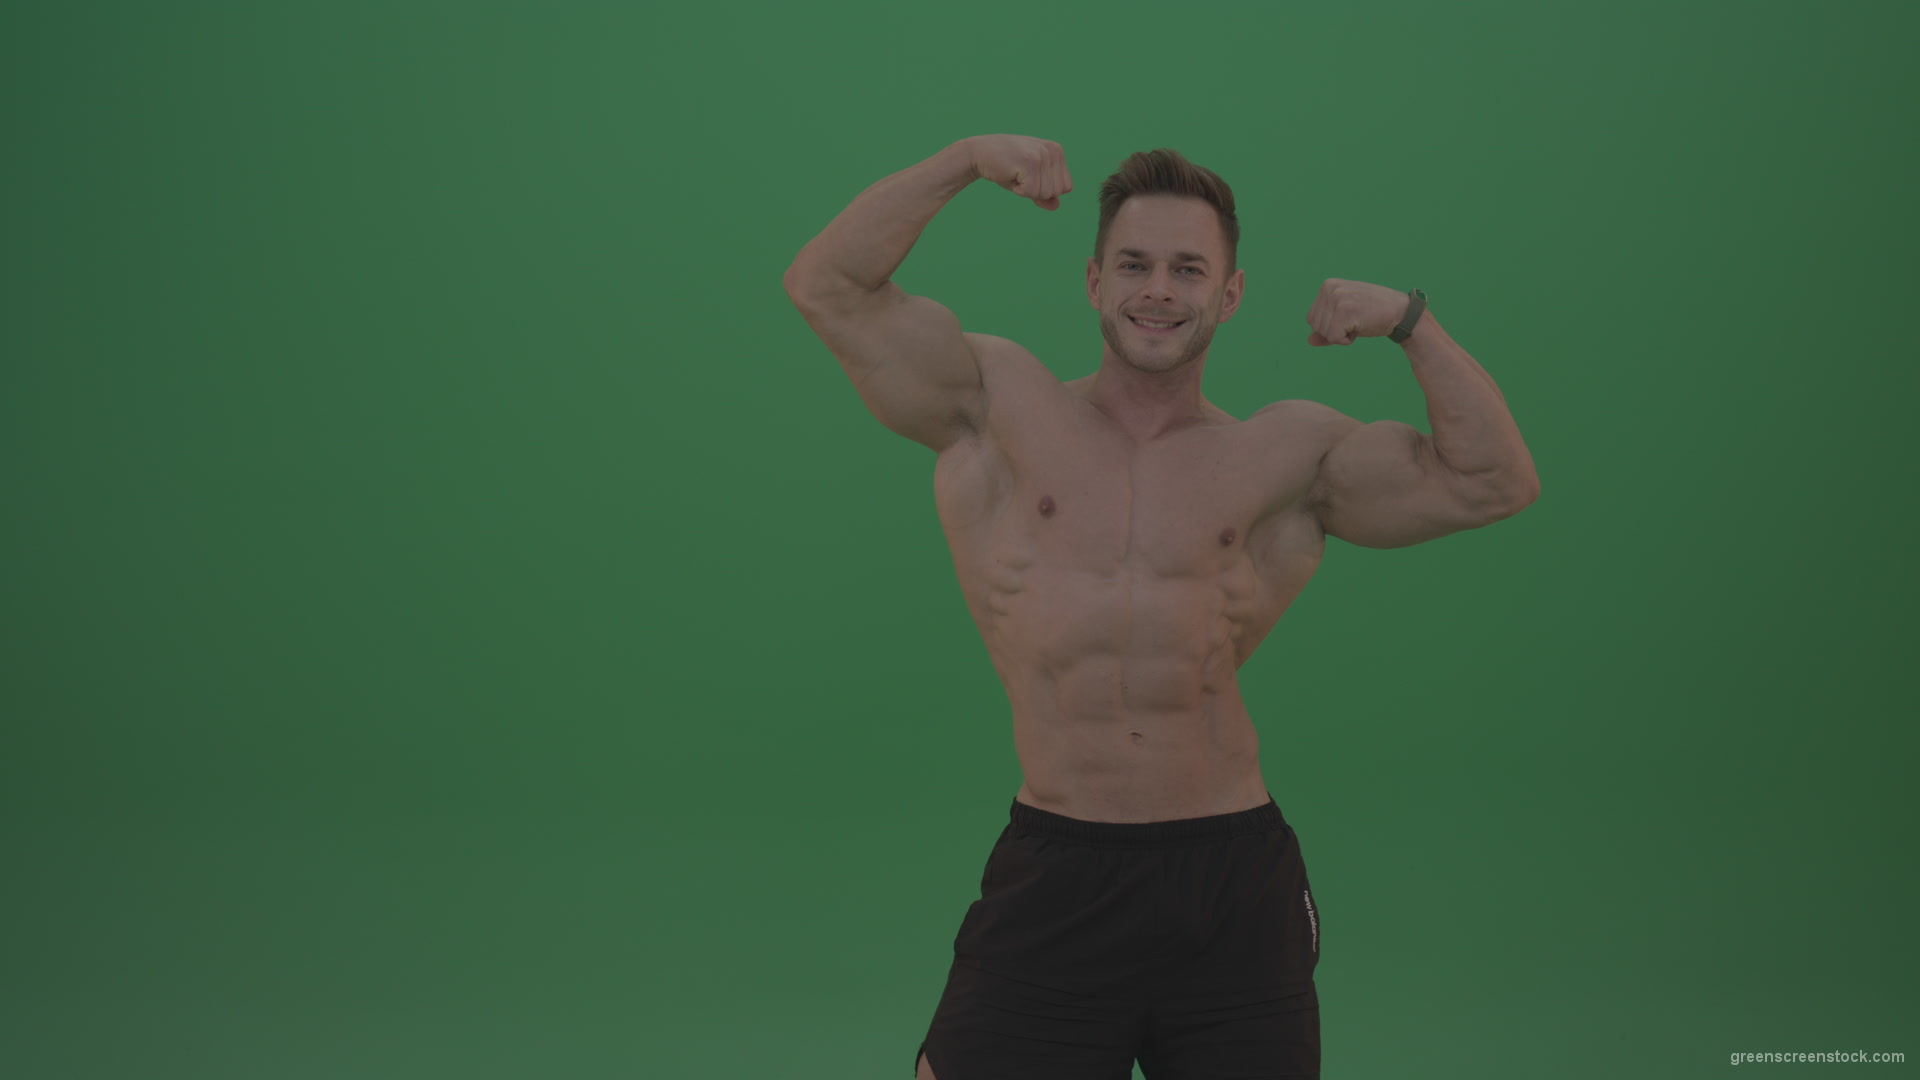 Green-Screen-Blone_Bodybuilder_Demonstrating_Front_Double_Biceps_And_Lateral_Spread_Positions_On_Green_Screen_Wall_Background_004 Green Screen Stock